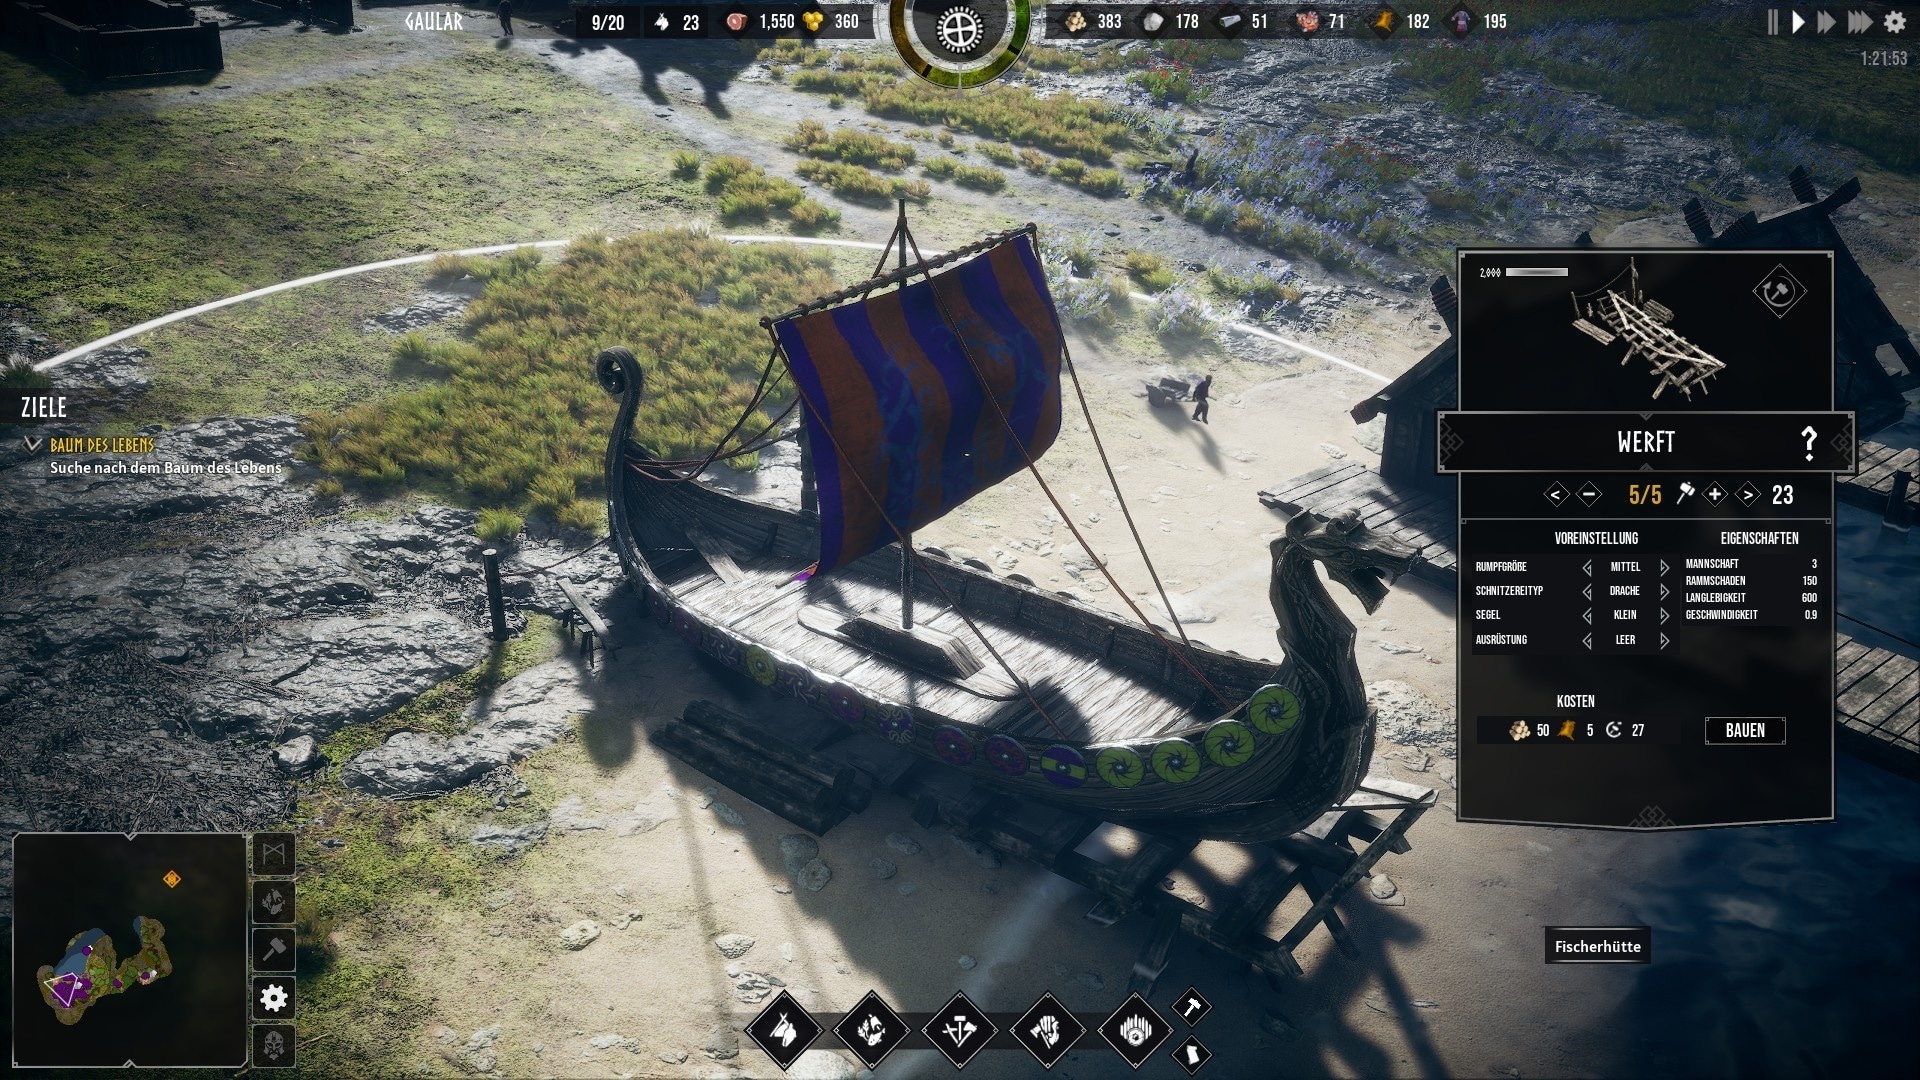 (If you want to be a real Viking, you can also launch a longboat. We can even customise that)